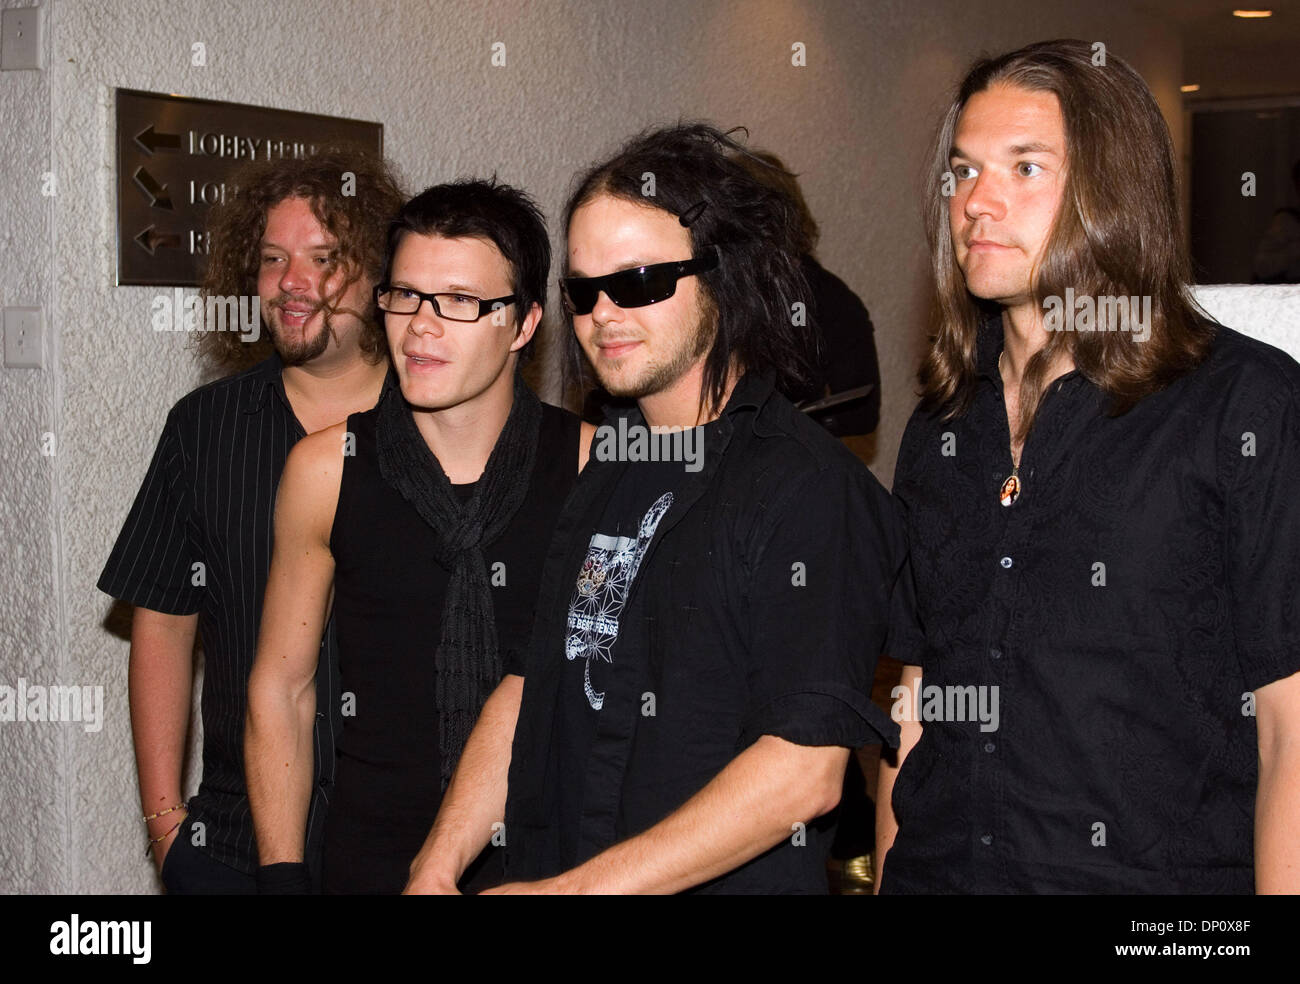 Apr 06, 2006; Mexico City, MEXICO; Musicians EERO HEINONEN, AKI HAKALA, LAURIE YLONEN and PAULI RANTASALMI, members of rock band 'The Rasmus' give a press conference as they promote their new album 'Hide From The Sun'. Mandatory Credit: Photo by Javier Rodriguez/ZUMA Press. (©) Copyright 2006 by Javier Rodriguez Stock Photo